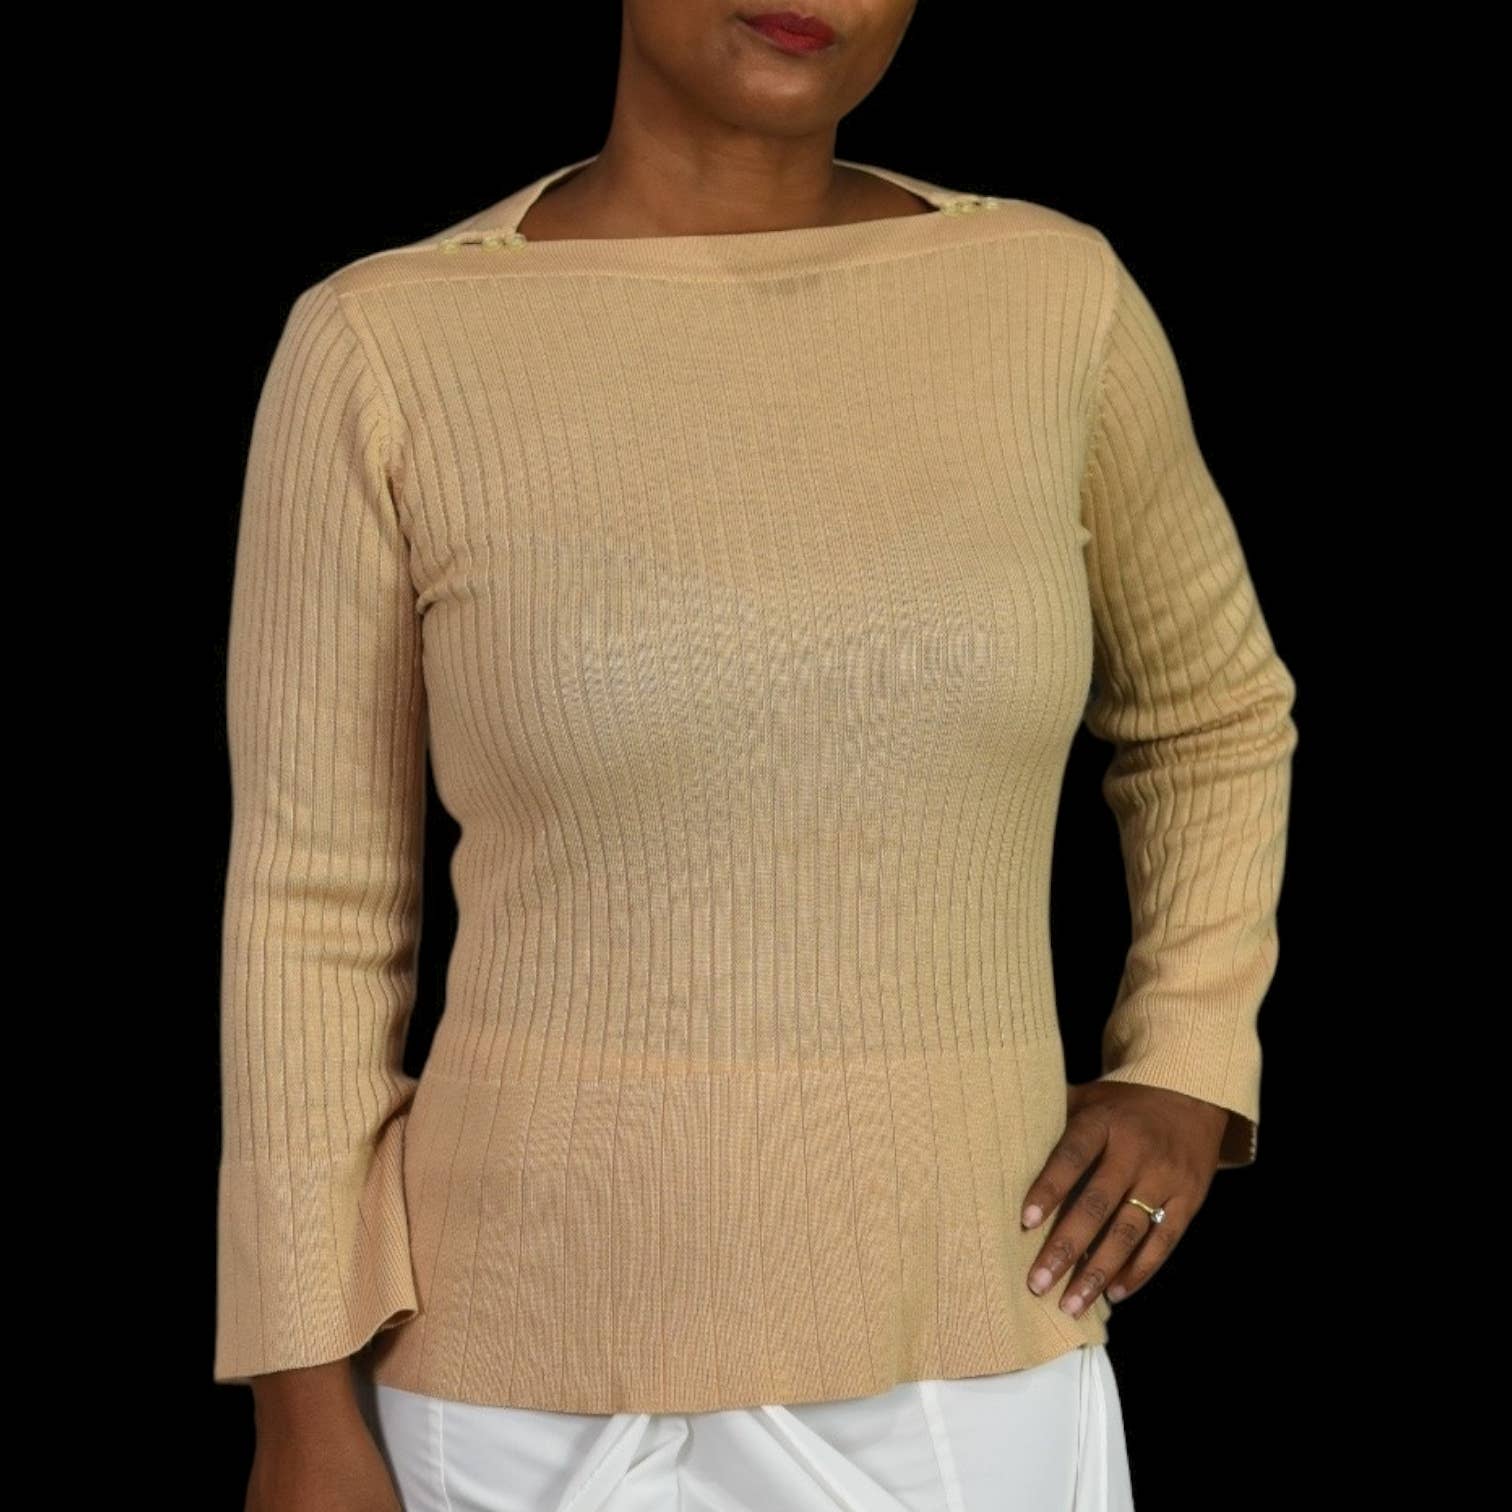 Vintage Daddys Money Ribbed Sweater Tan Camel Bell Sleeve Boat Neck Knit Size Medium